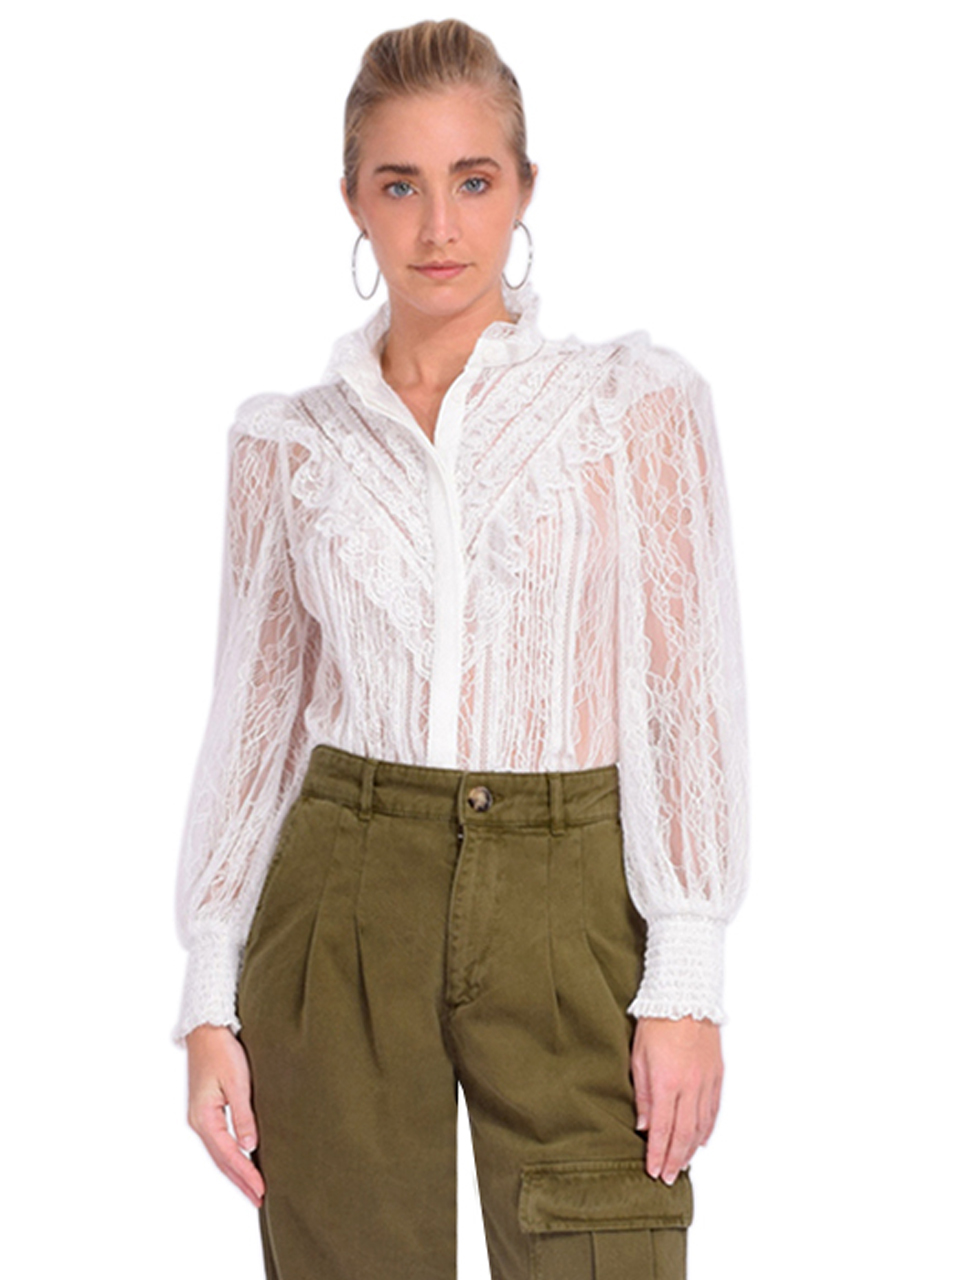 ALICE + OLIVIA Rheba Mock Neck Lace Blouse in Off White Front View